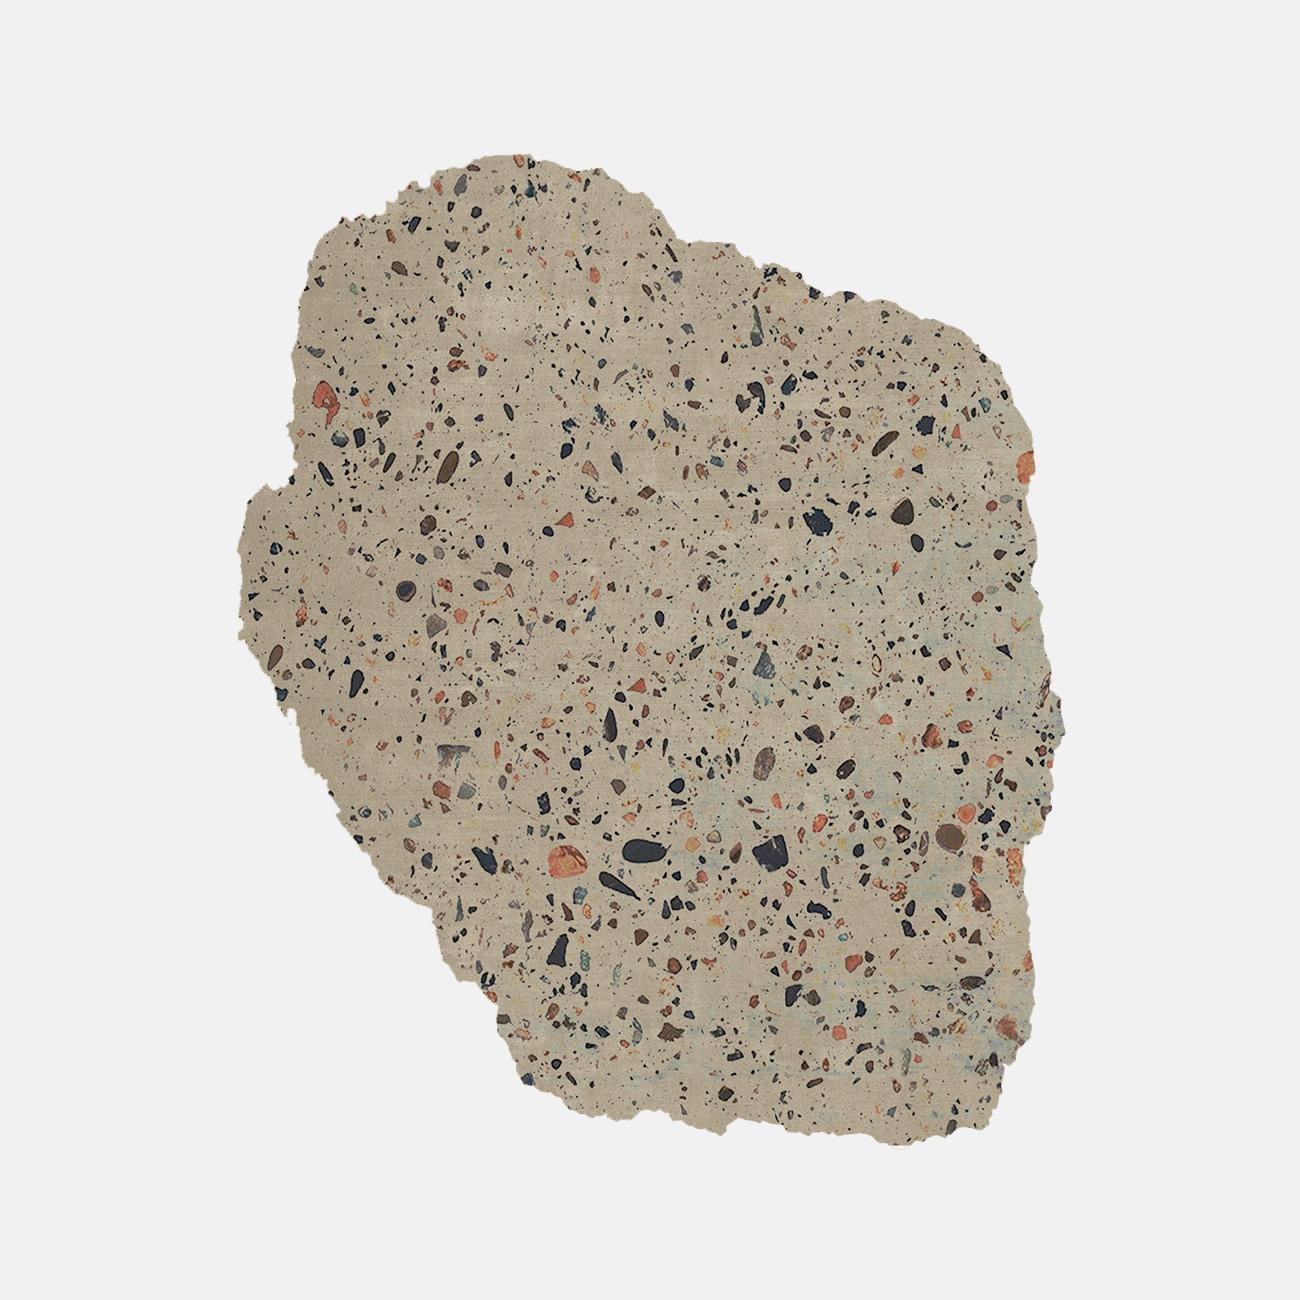 Terrazzo Superiore Edit Rug by Atelier Bowy C.D.
Dimensions: W 243 x L 300 cm.
Materials: Wool, silk.

Available in  W170 x L215, W190 x L235, W210 x L245, W243 x L300 cm.

Atelier Bowy C.D. is dedicated to crafting contemporary handmade rugs for